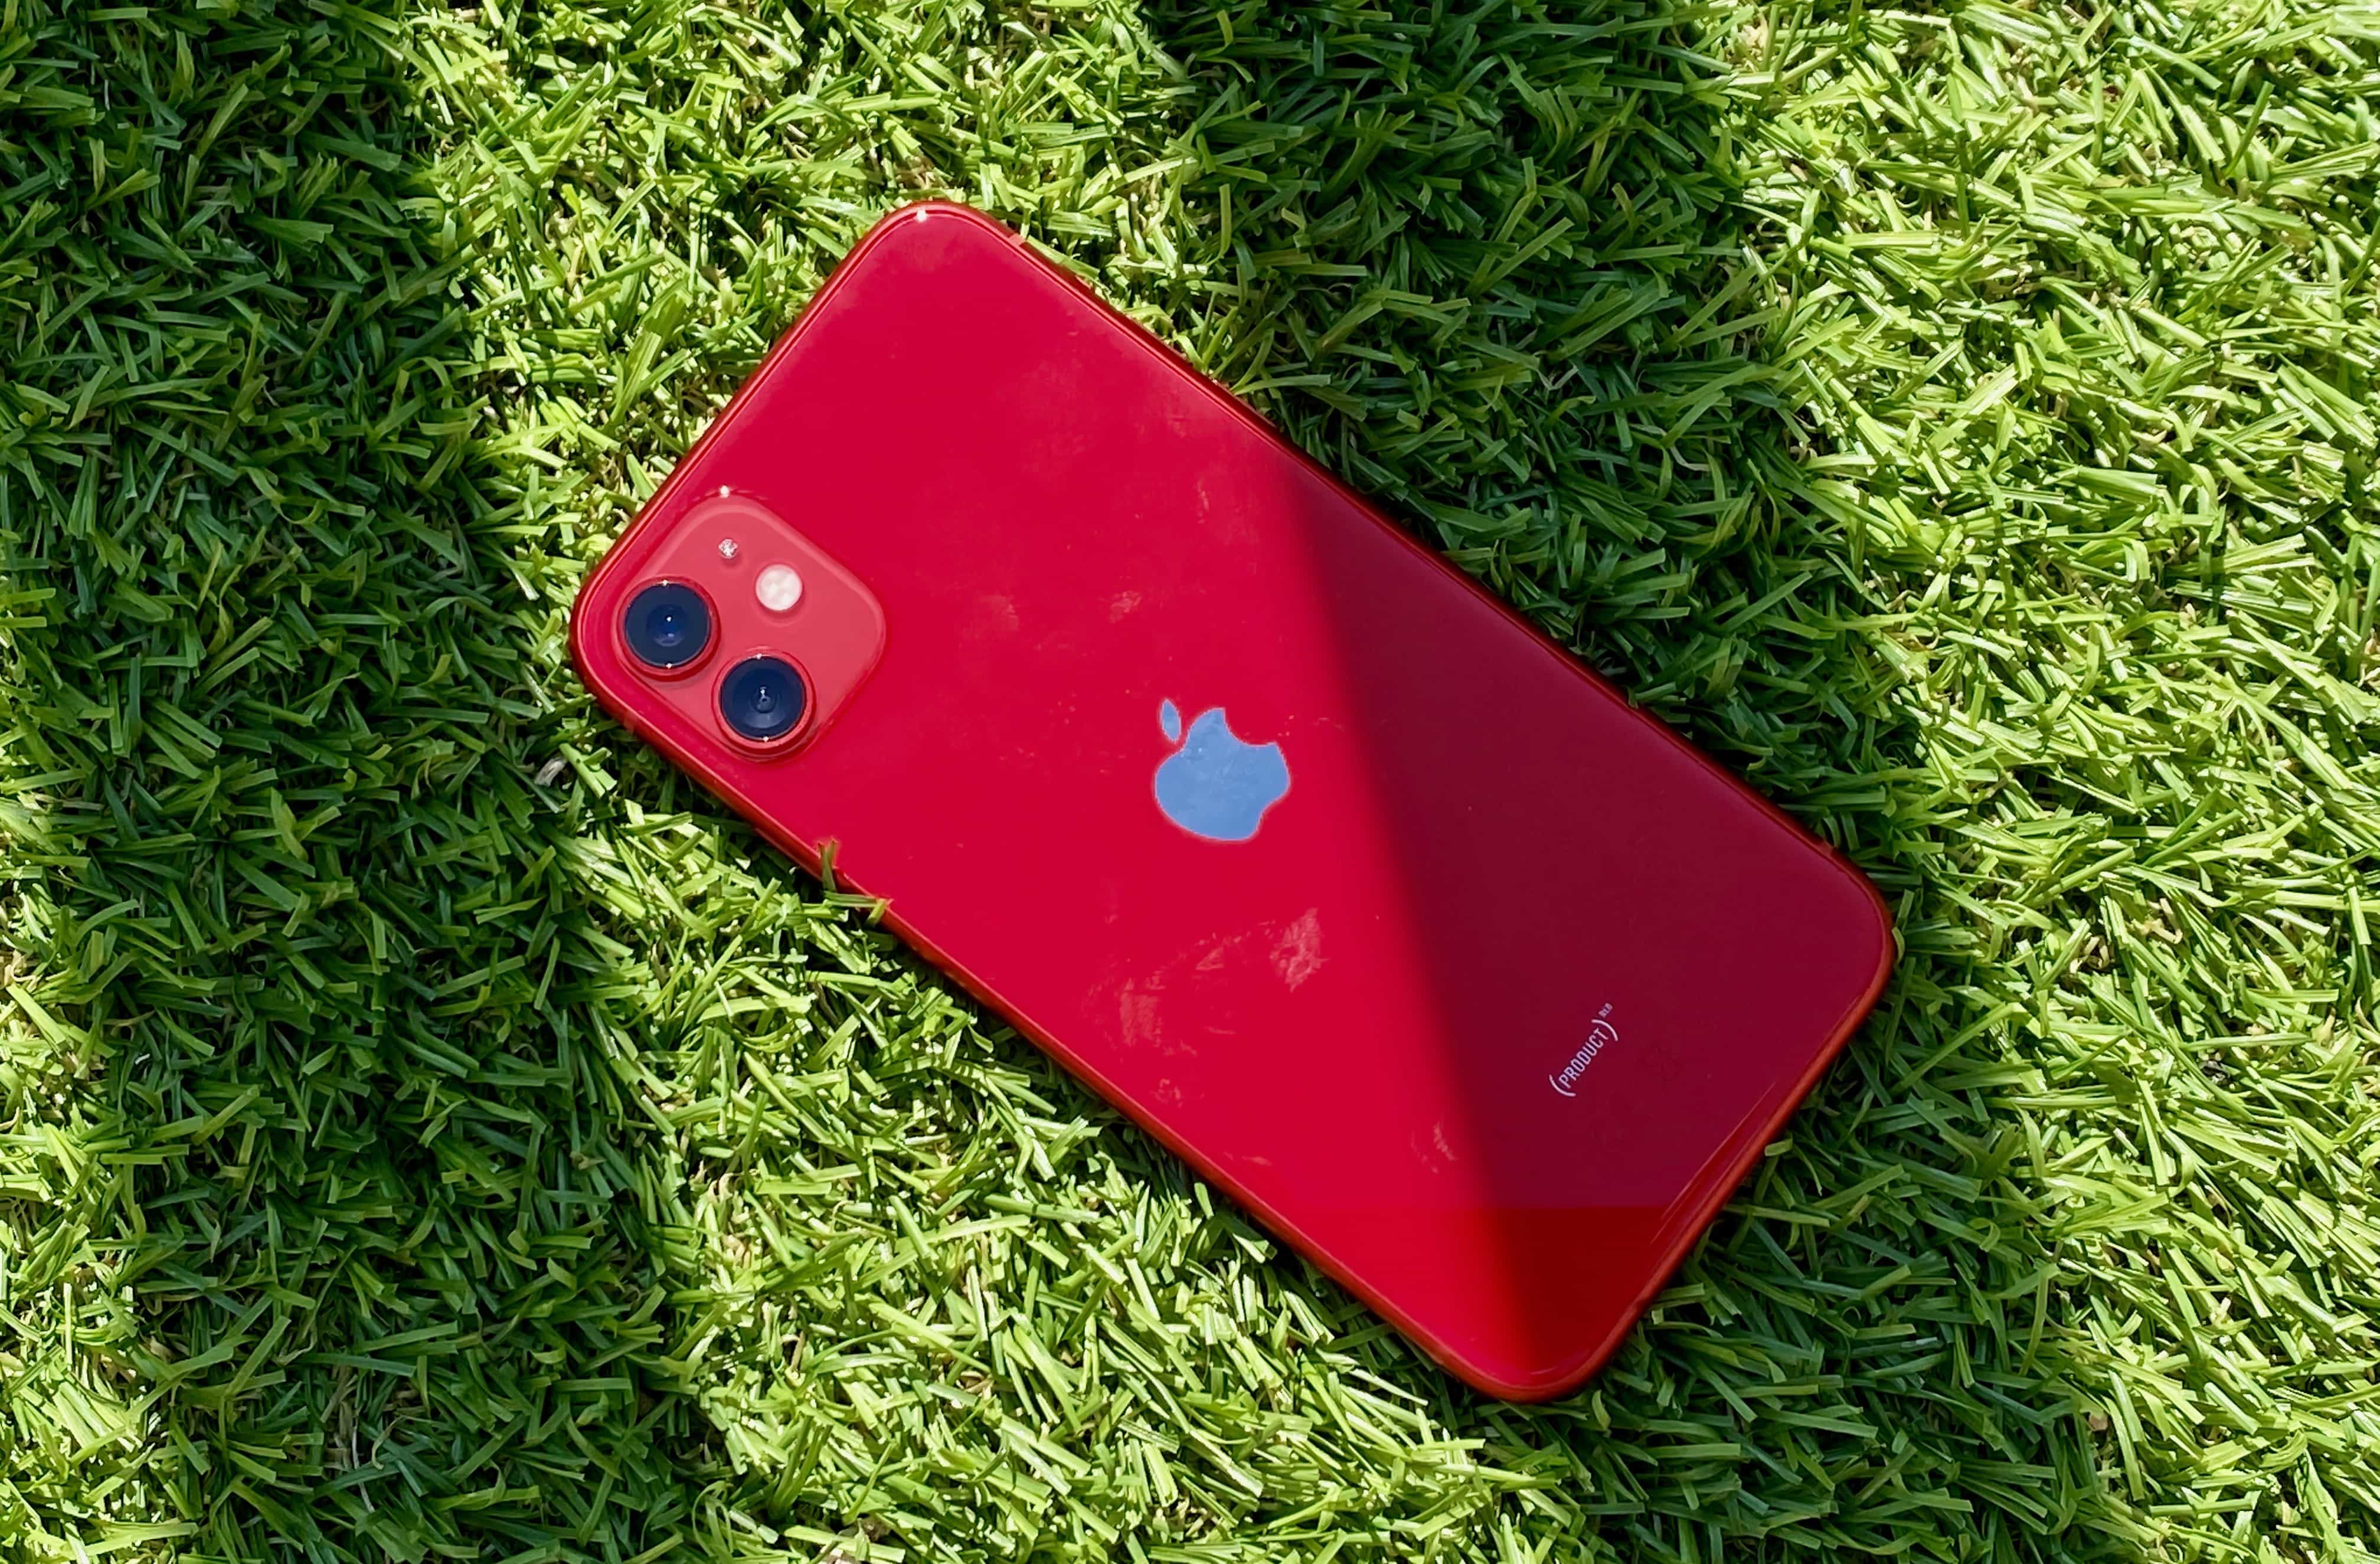 Is iPhone 11 in red?